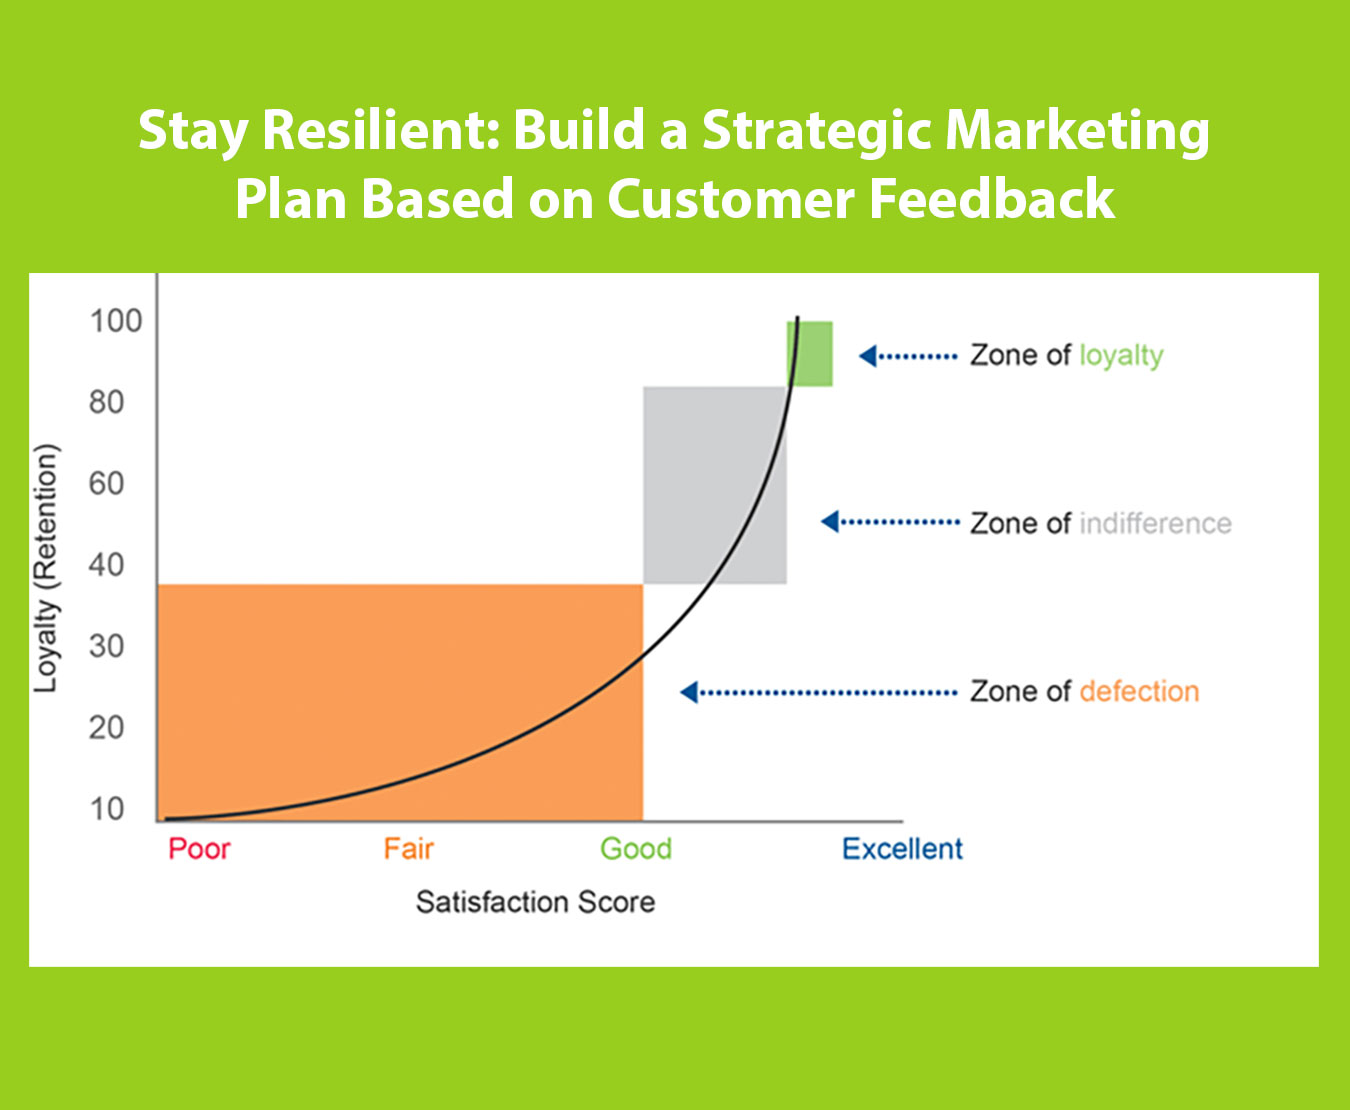 annual strategic marketing planning benefits from customer surveys that provide feedback on satisfaction and guide innovation. The image shows how higher satisfaction scores relate to higher loyalty